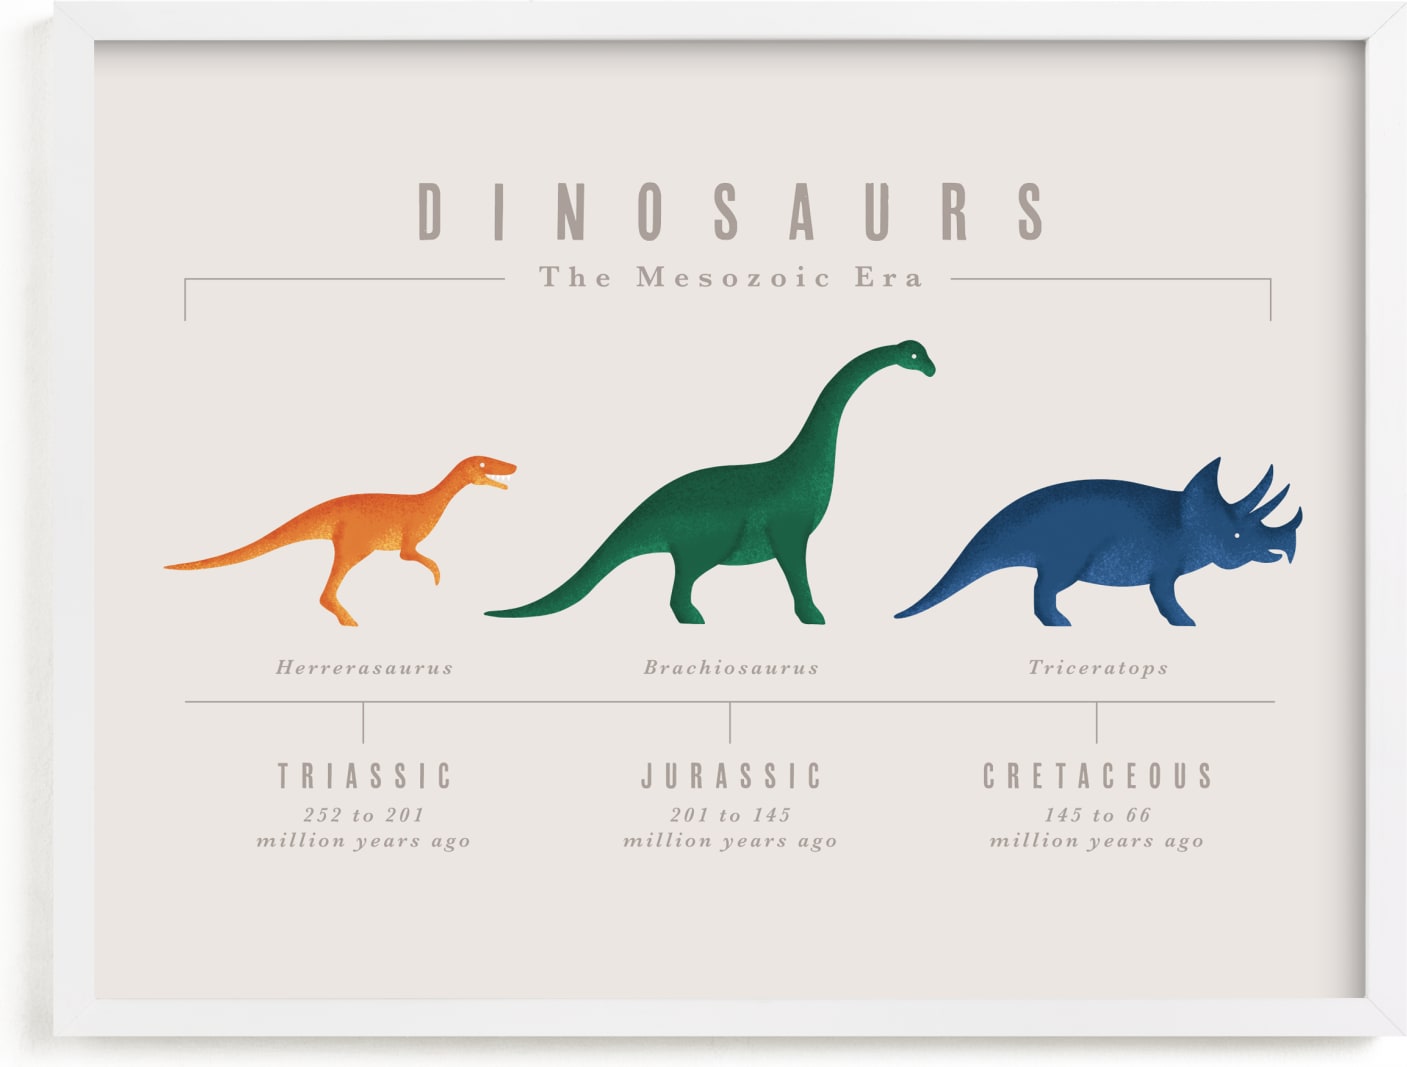 This is a colorful art by Ashley Presutti Beasley called Dino Timeline.